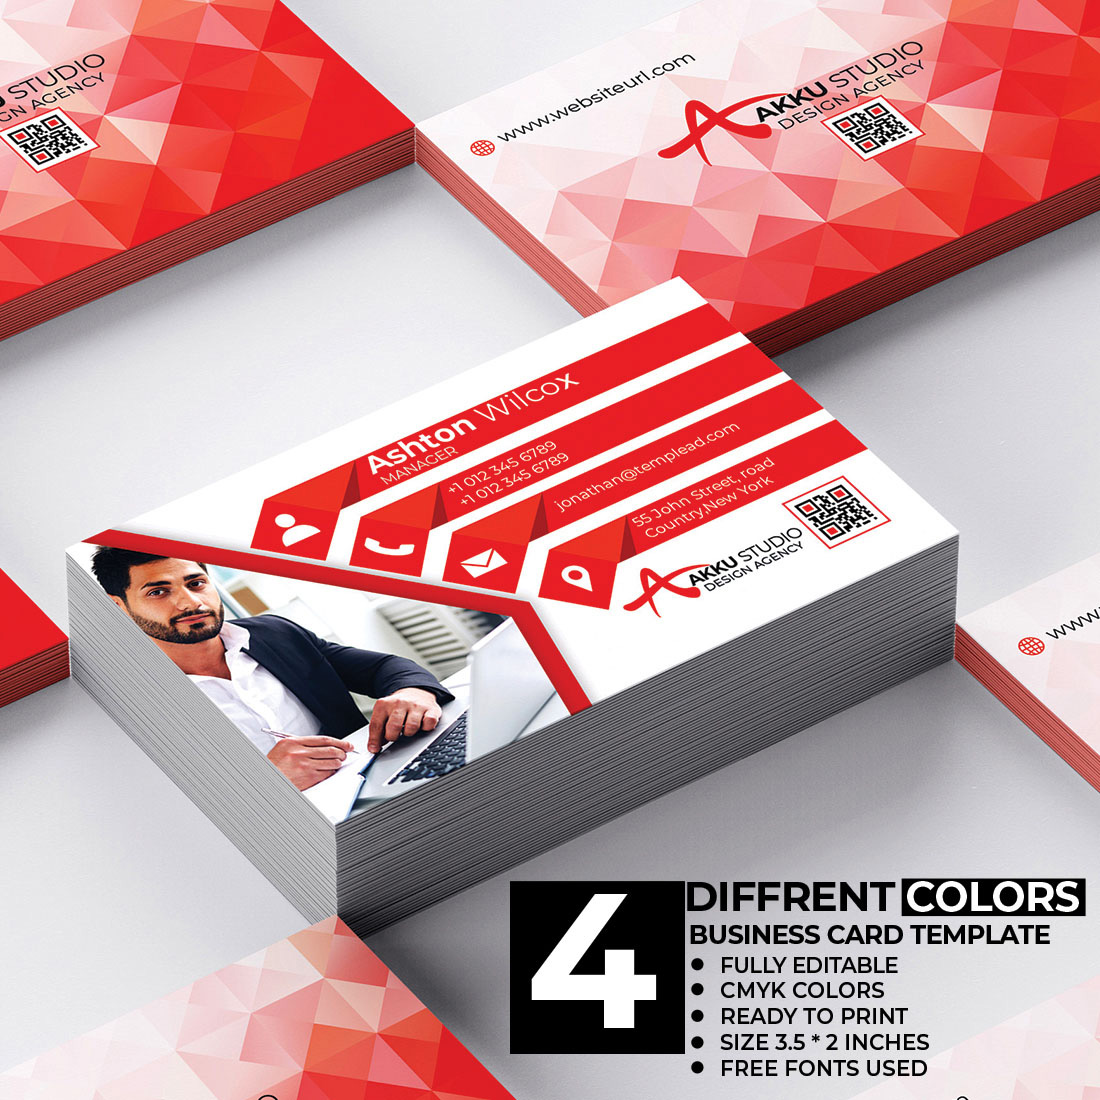 Creative Business Card Red Template cover image.